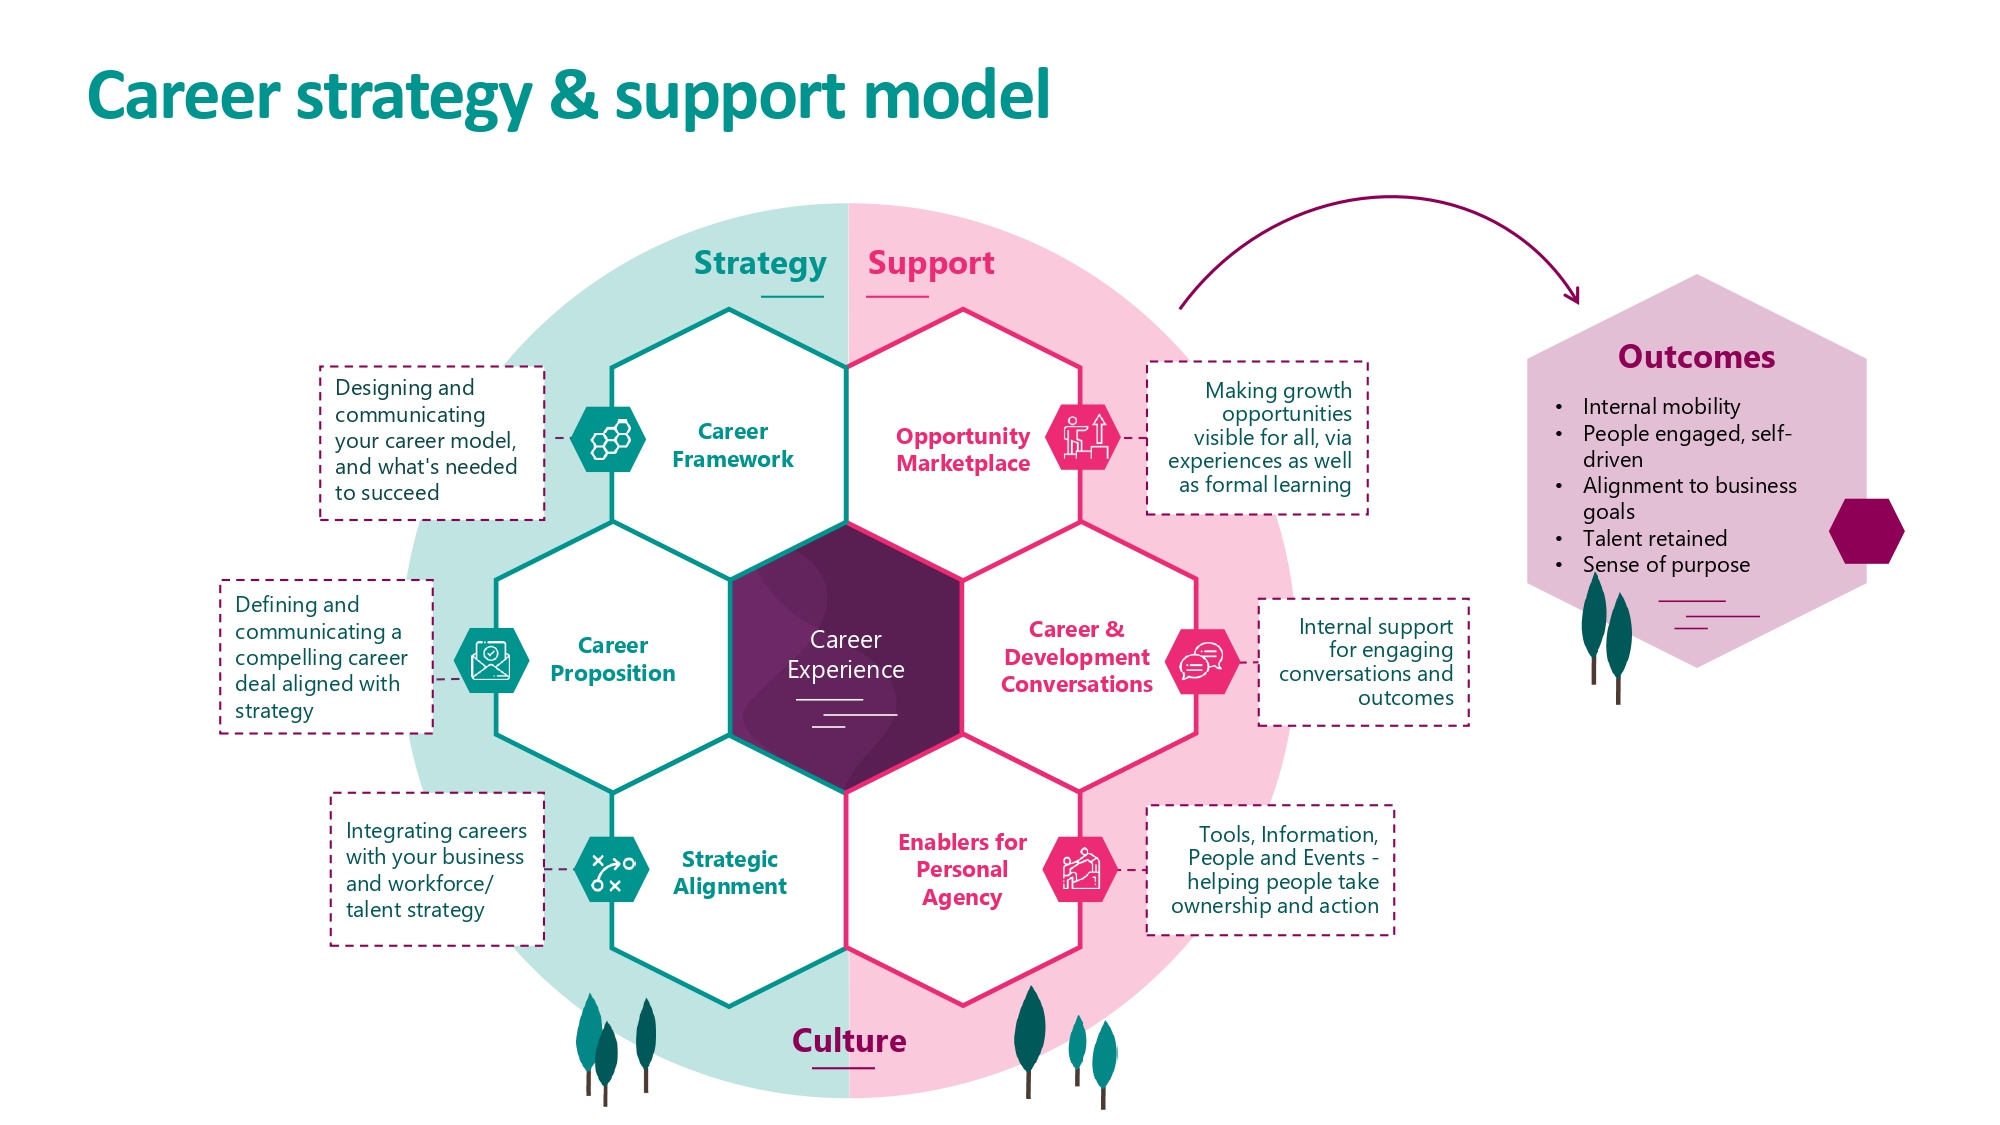 Career strategy and support model